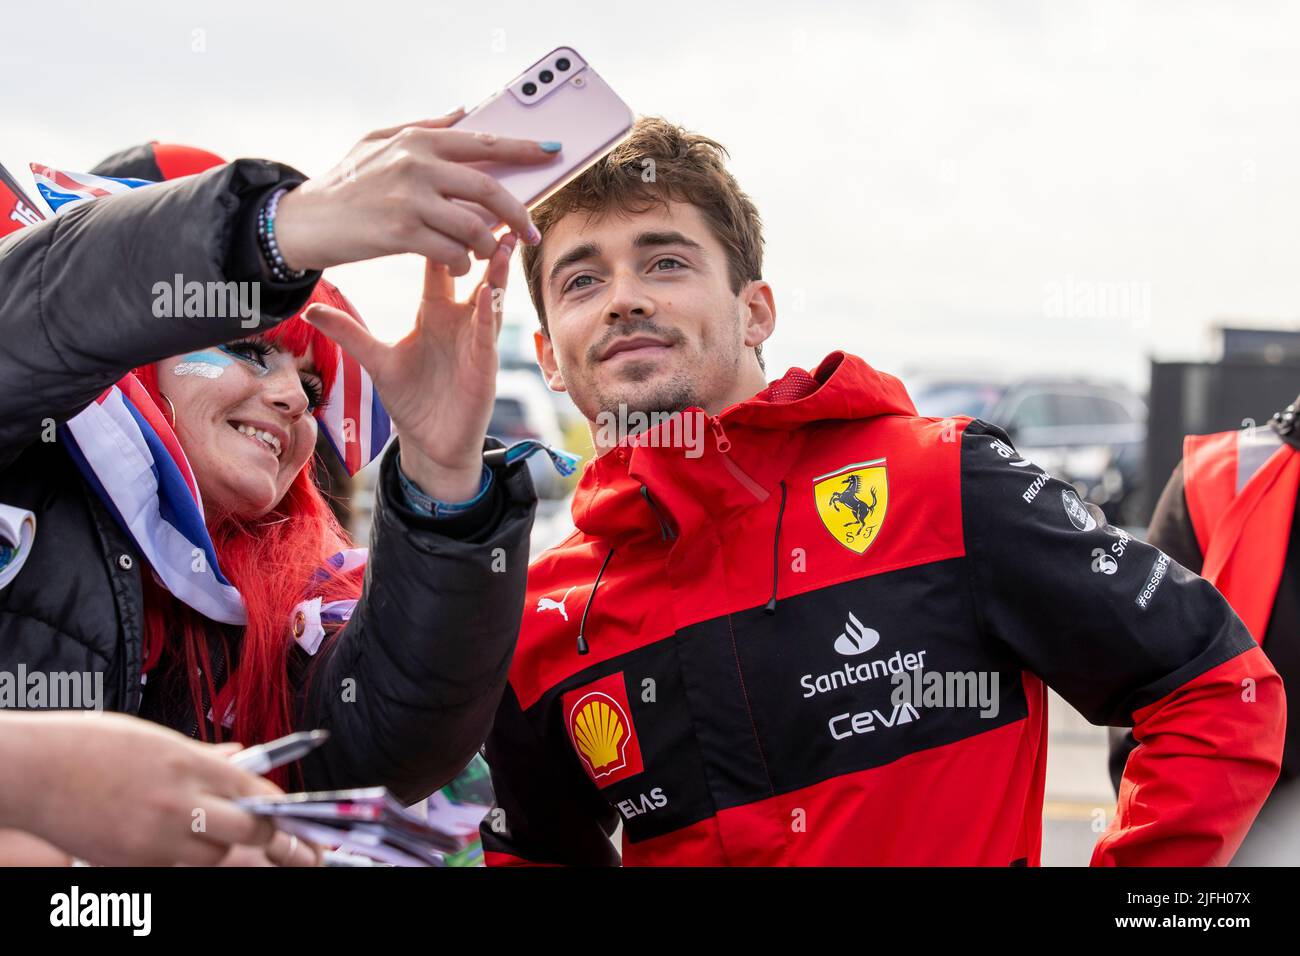 Silverstone, UK. 3rd July 2022, Silverstone Circuit, Silverstone, Northamptonshire, England: British F1 Grand Prix, Race day: Scuderia Ferrari driver Charles Leclerc poses for a selfie Credit: Action Plus Sports Images/Alamy Live News Stock Photo